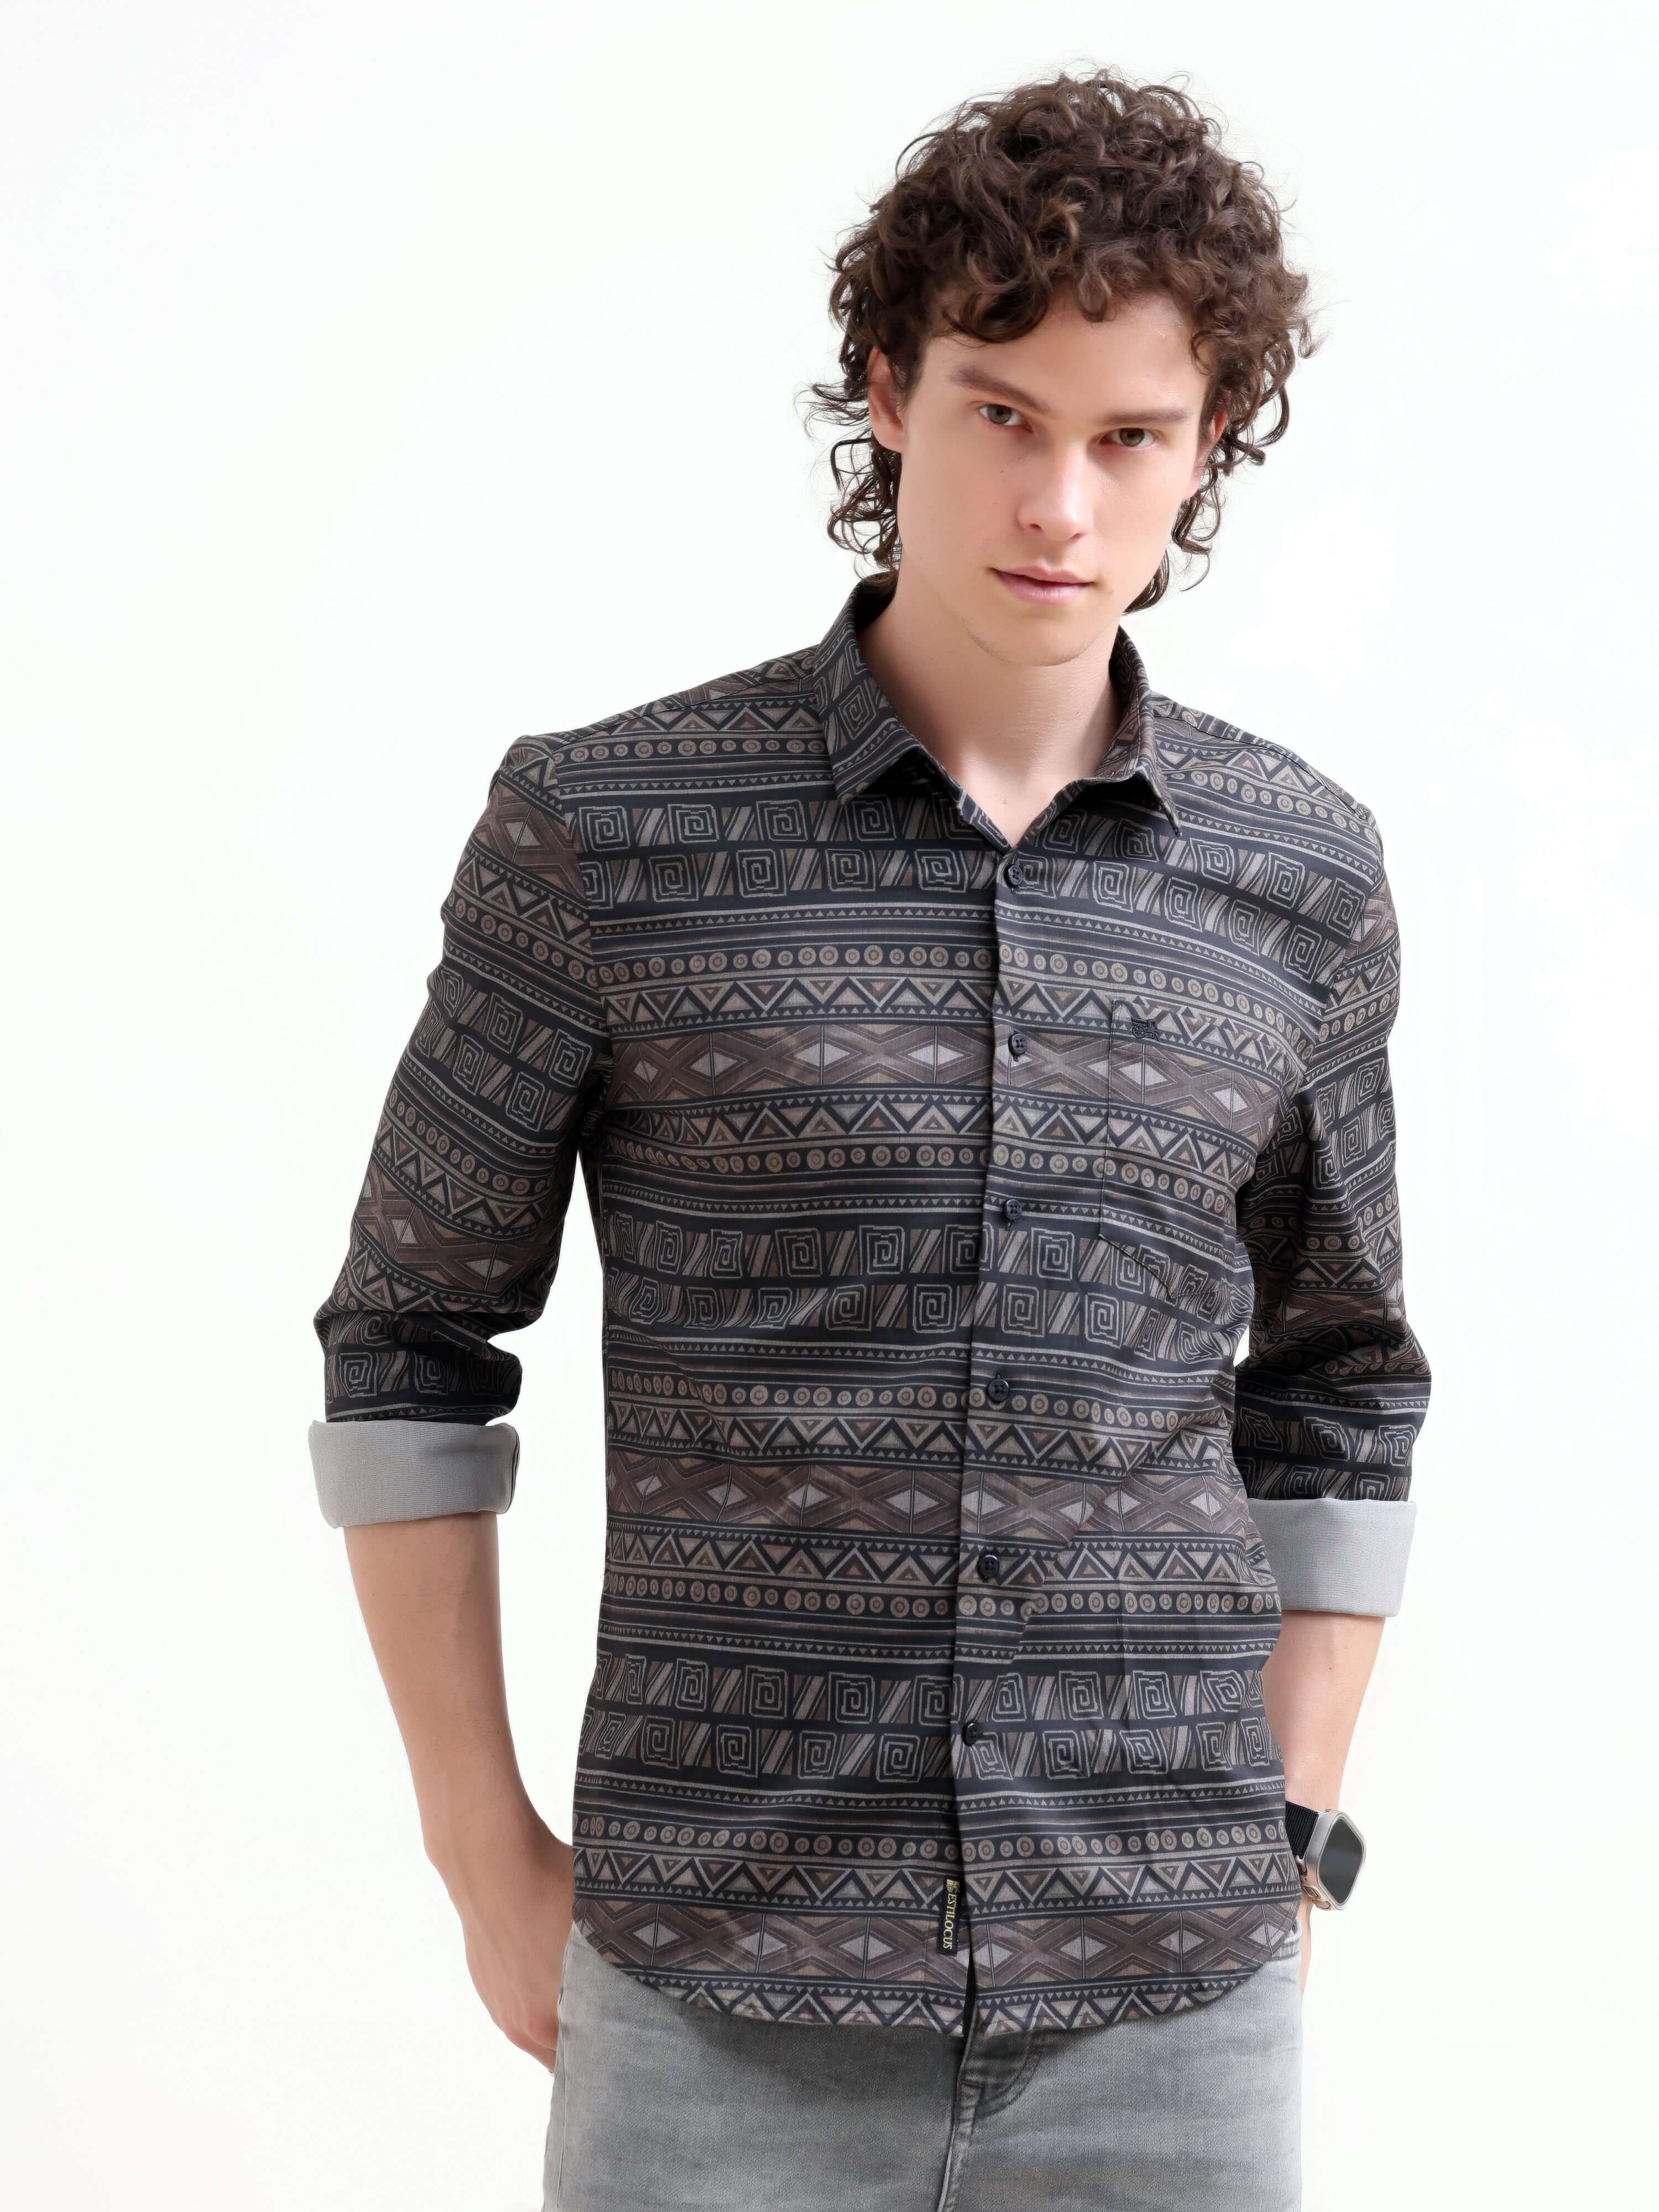 Dusky Black Tribal Print Shirt - New Men's Summer Arrival shop online at Estilocus. Elevate your summer with our Dusky Black Shirt featuring bold tribal prints. Perfect for casual style - get the latest in men's fashion!